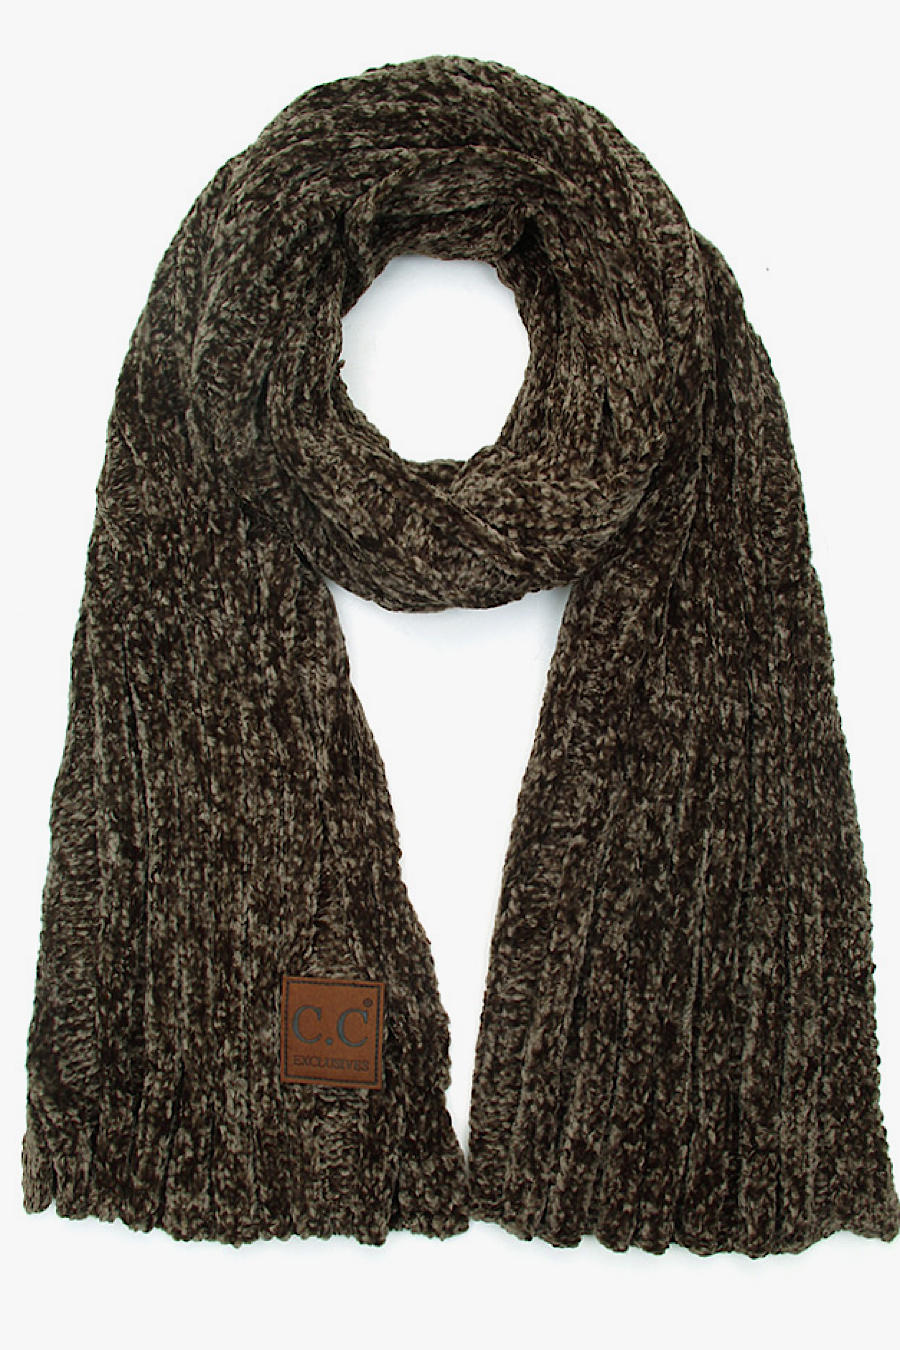 C.C. Chenille Scarf in Olive or Mustard